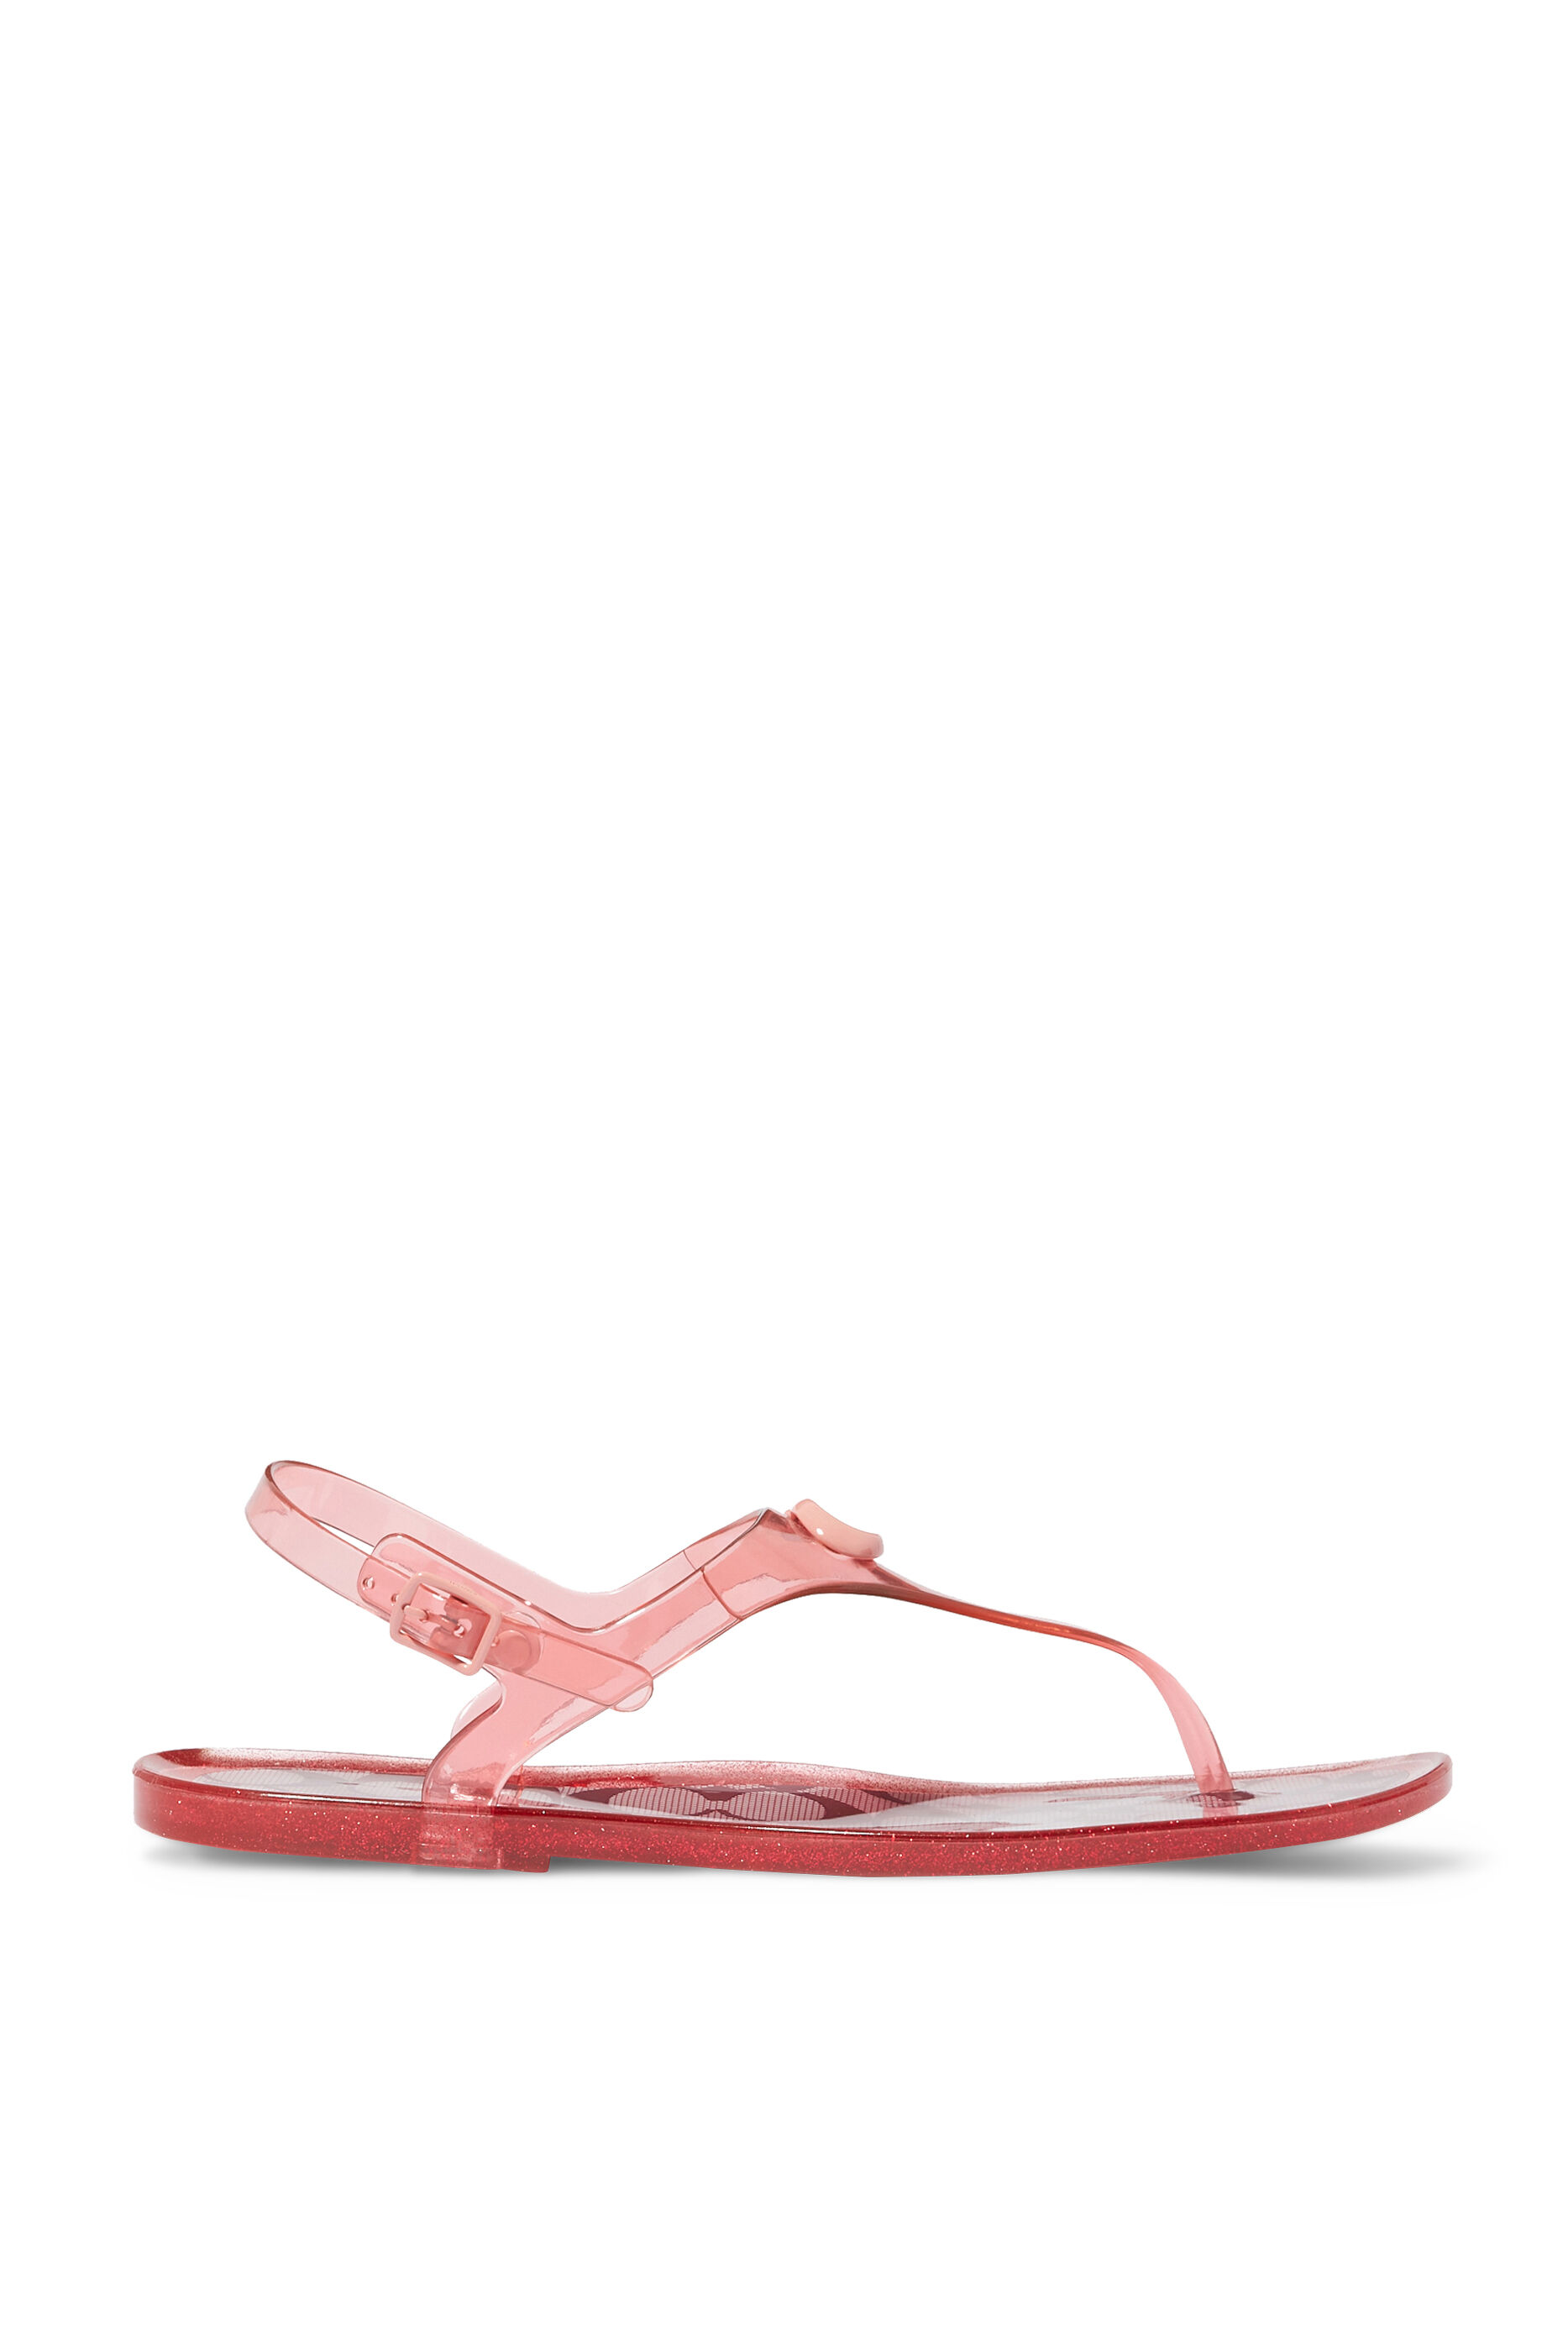 Coach Gold Jelly Thong Sandals 8B Rubber Sandals Logo Bows Flats | Rubber  sandals, Bow flats, Sandals